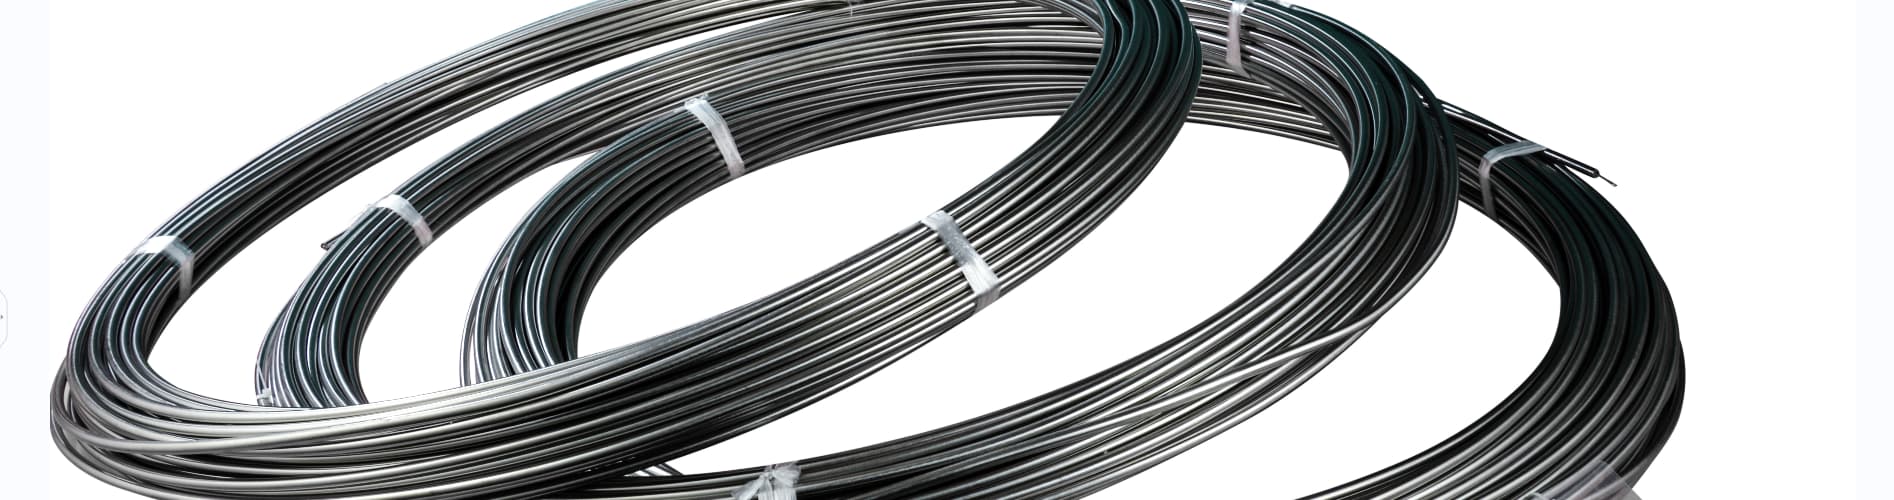 Mineral insulated heating cable